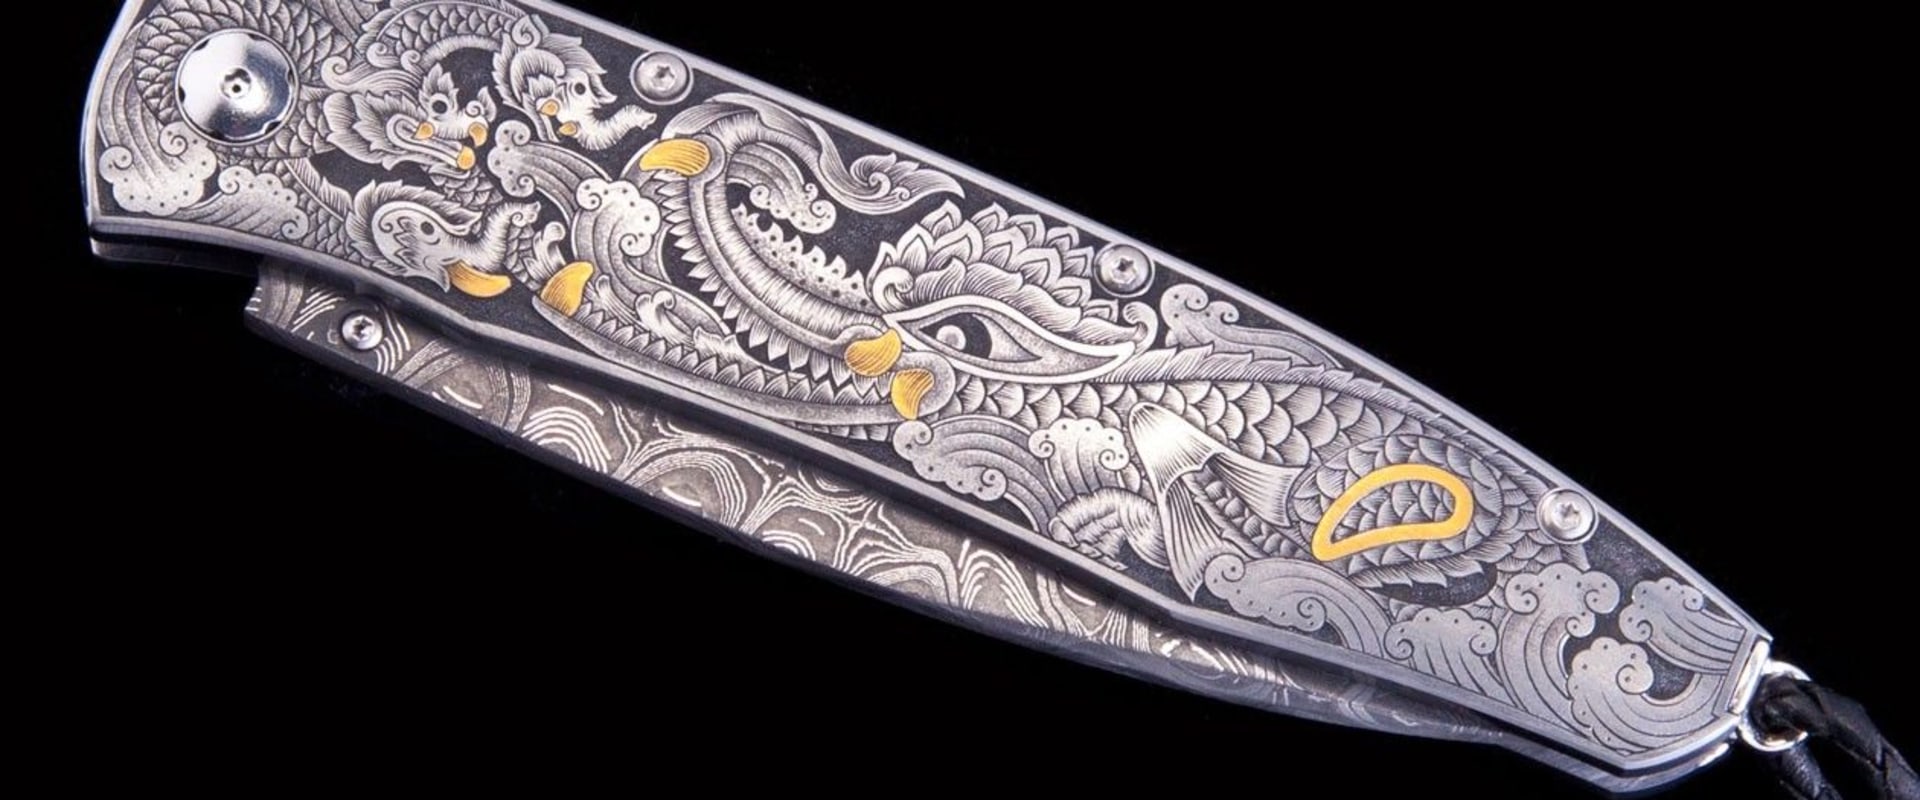 The Most Coveted Knives: From Swiss Army Knife to Ouroboros